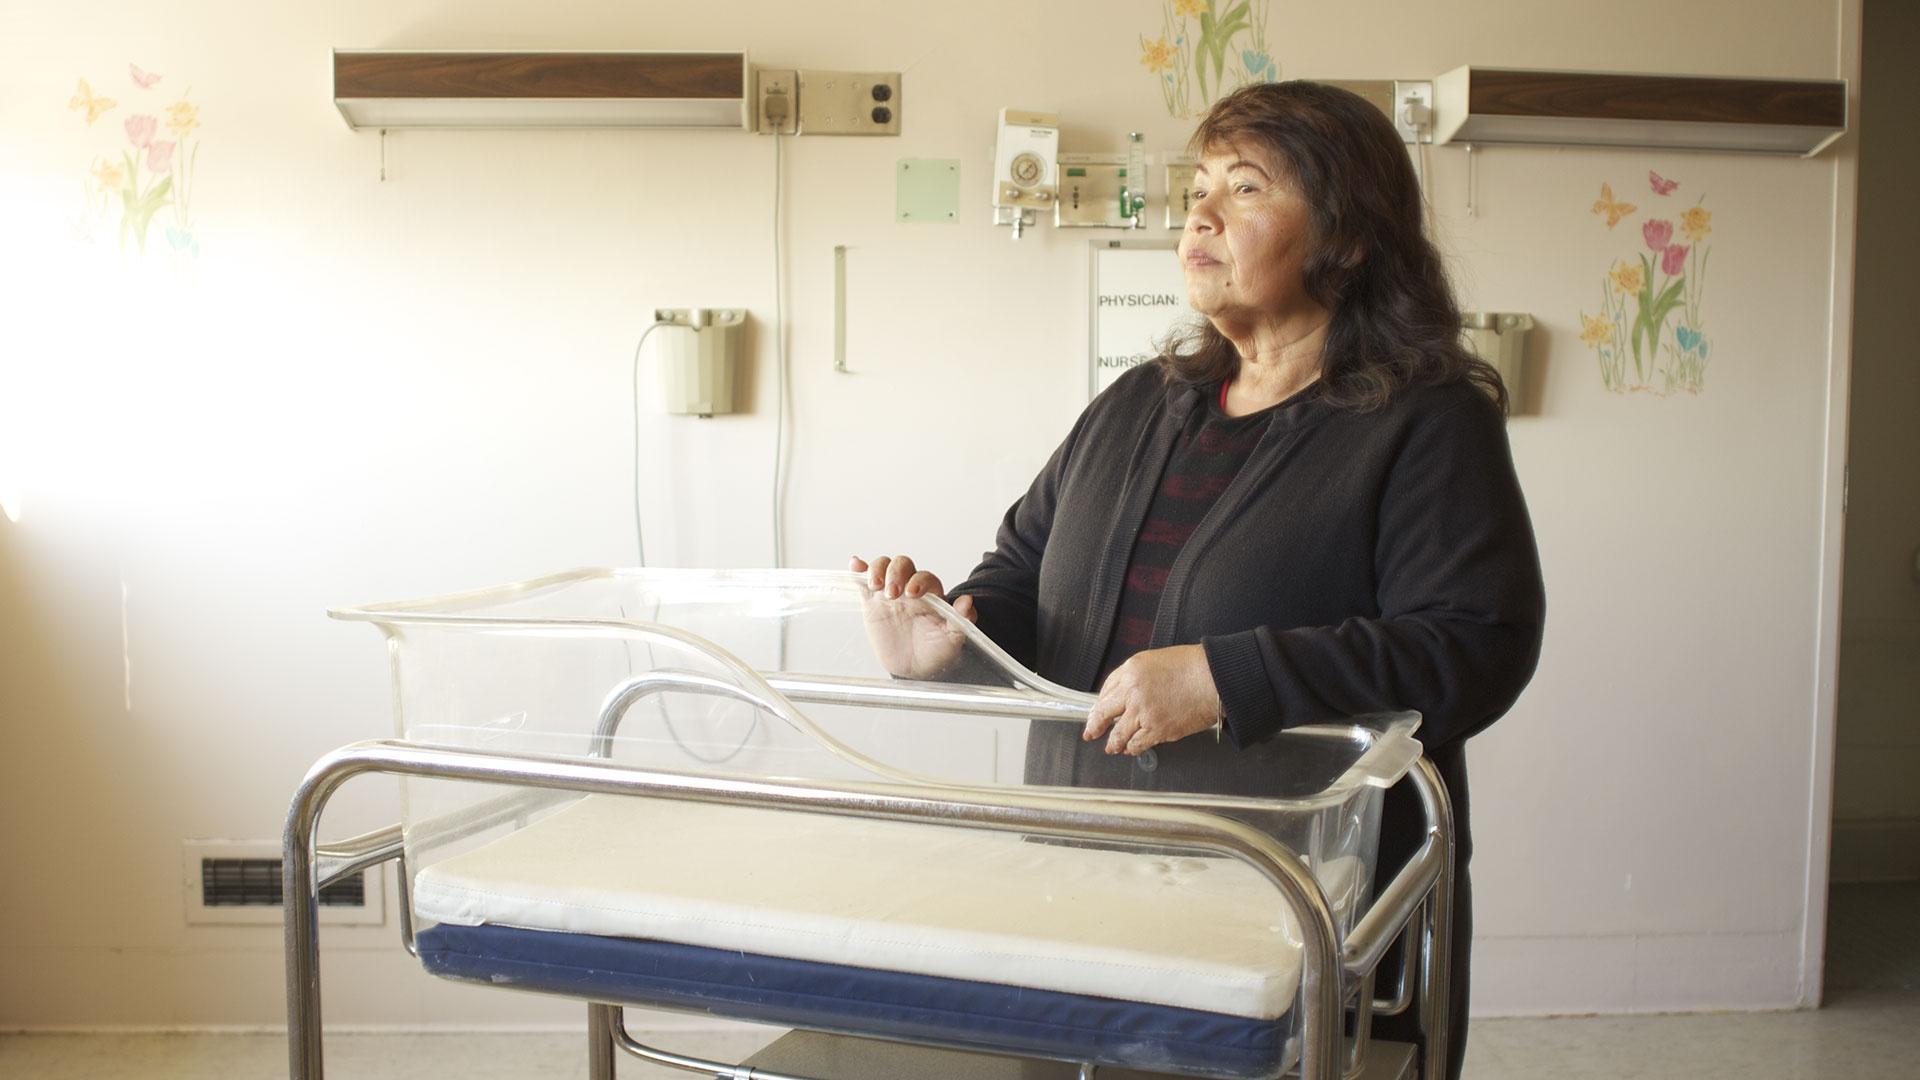 A Latinx woman stands over a hospital baby bassinet looking into the distance